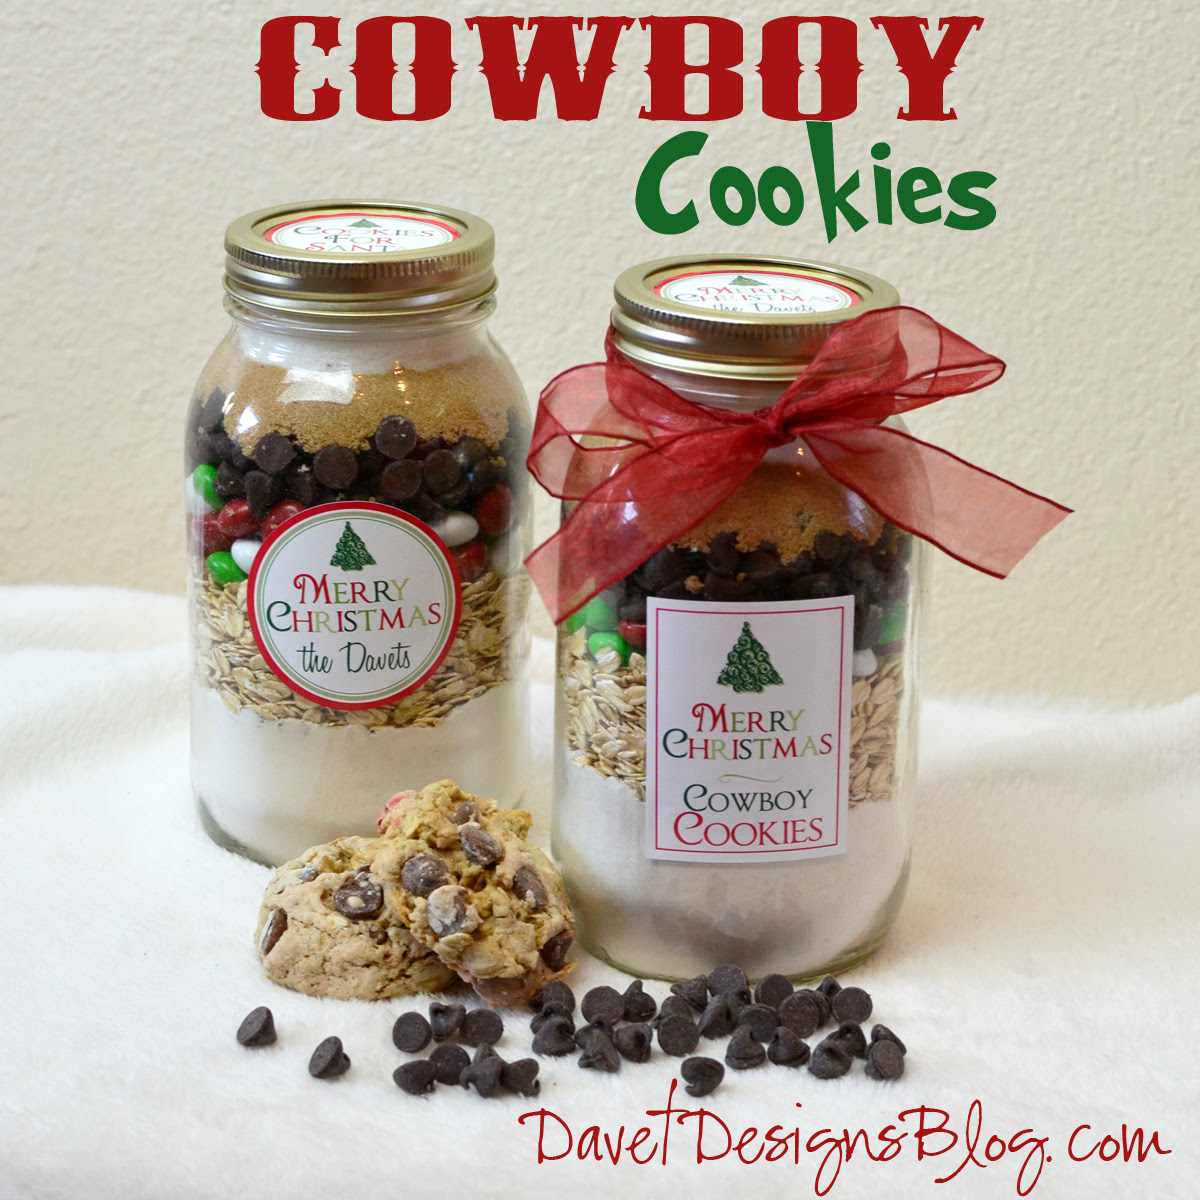 Craft ideas and more from Davet Designs: 8th Day of Christmas in a Jar ...